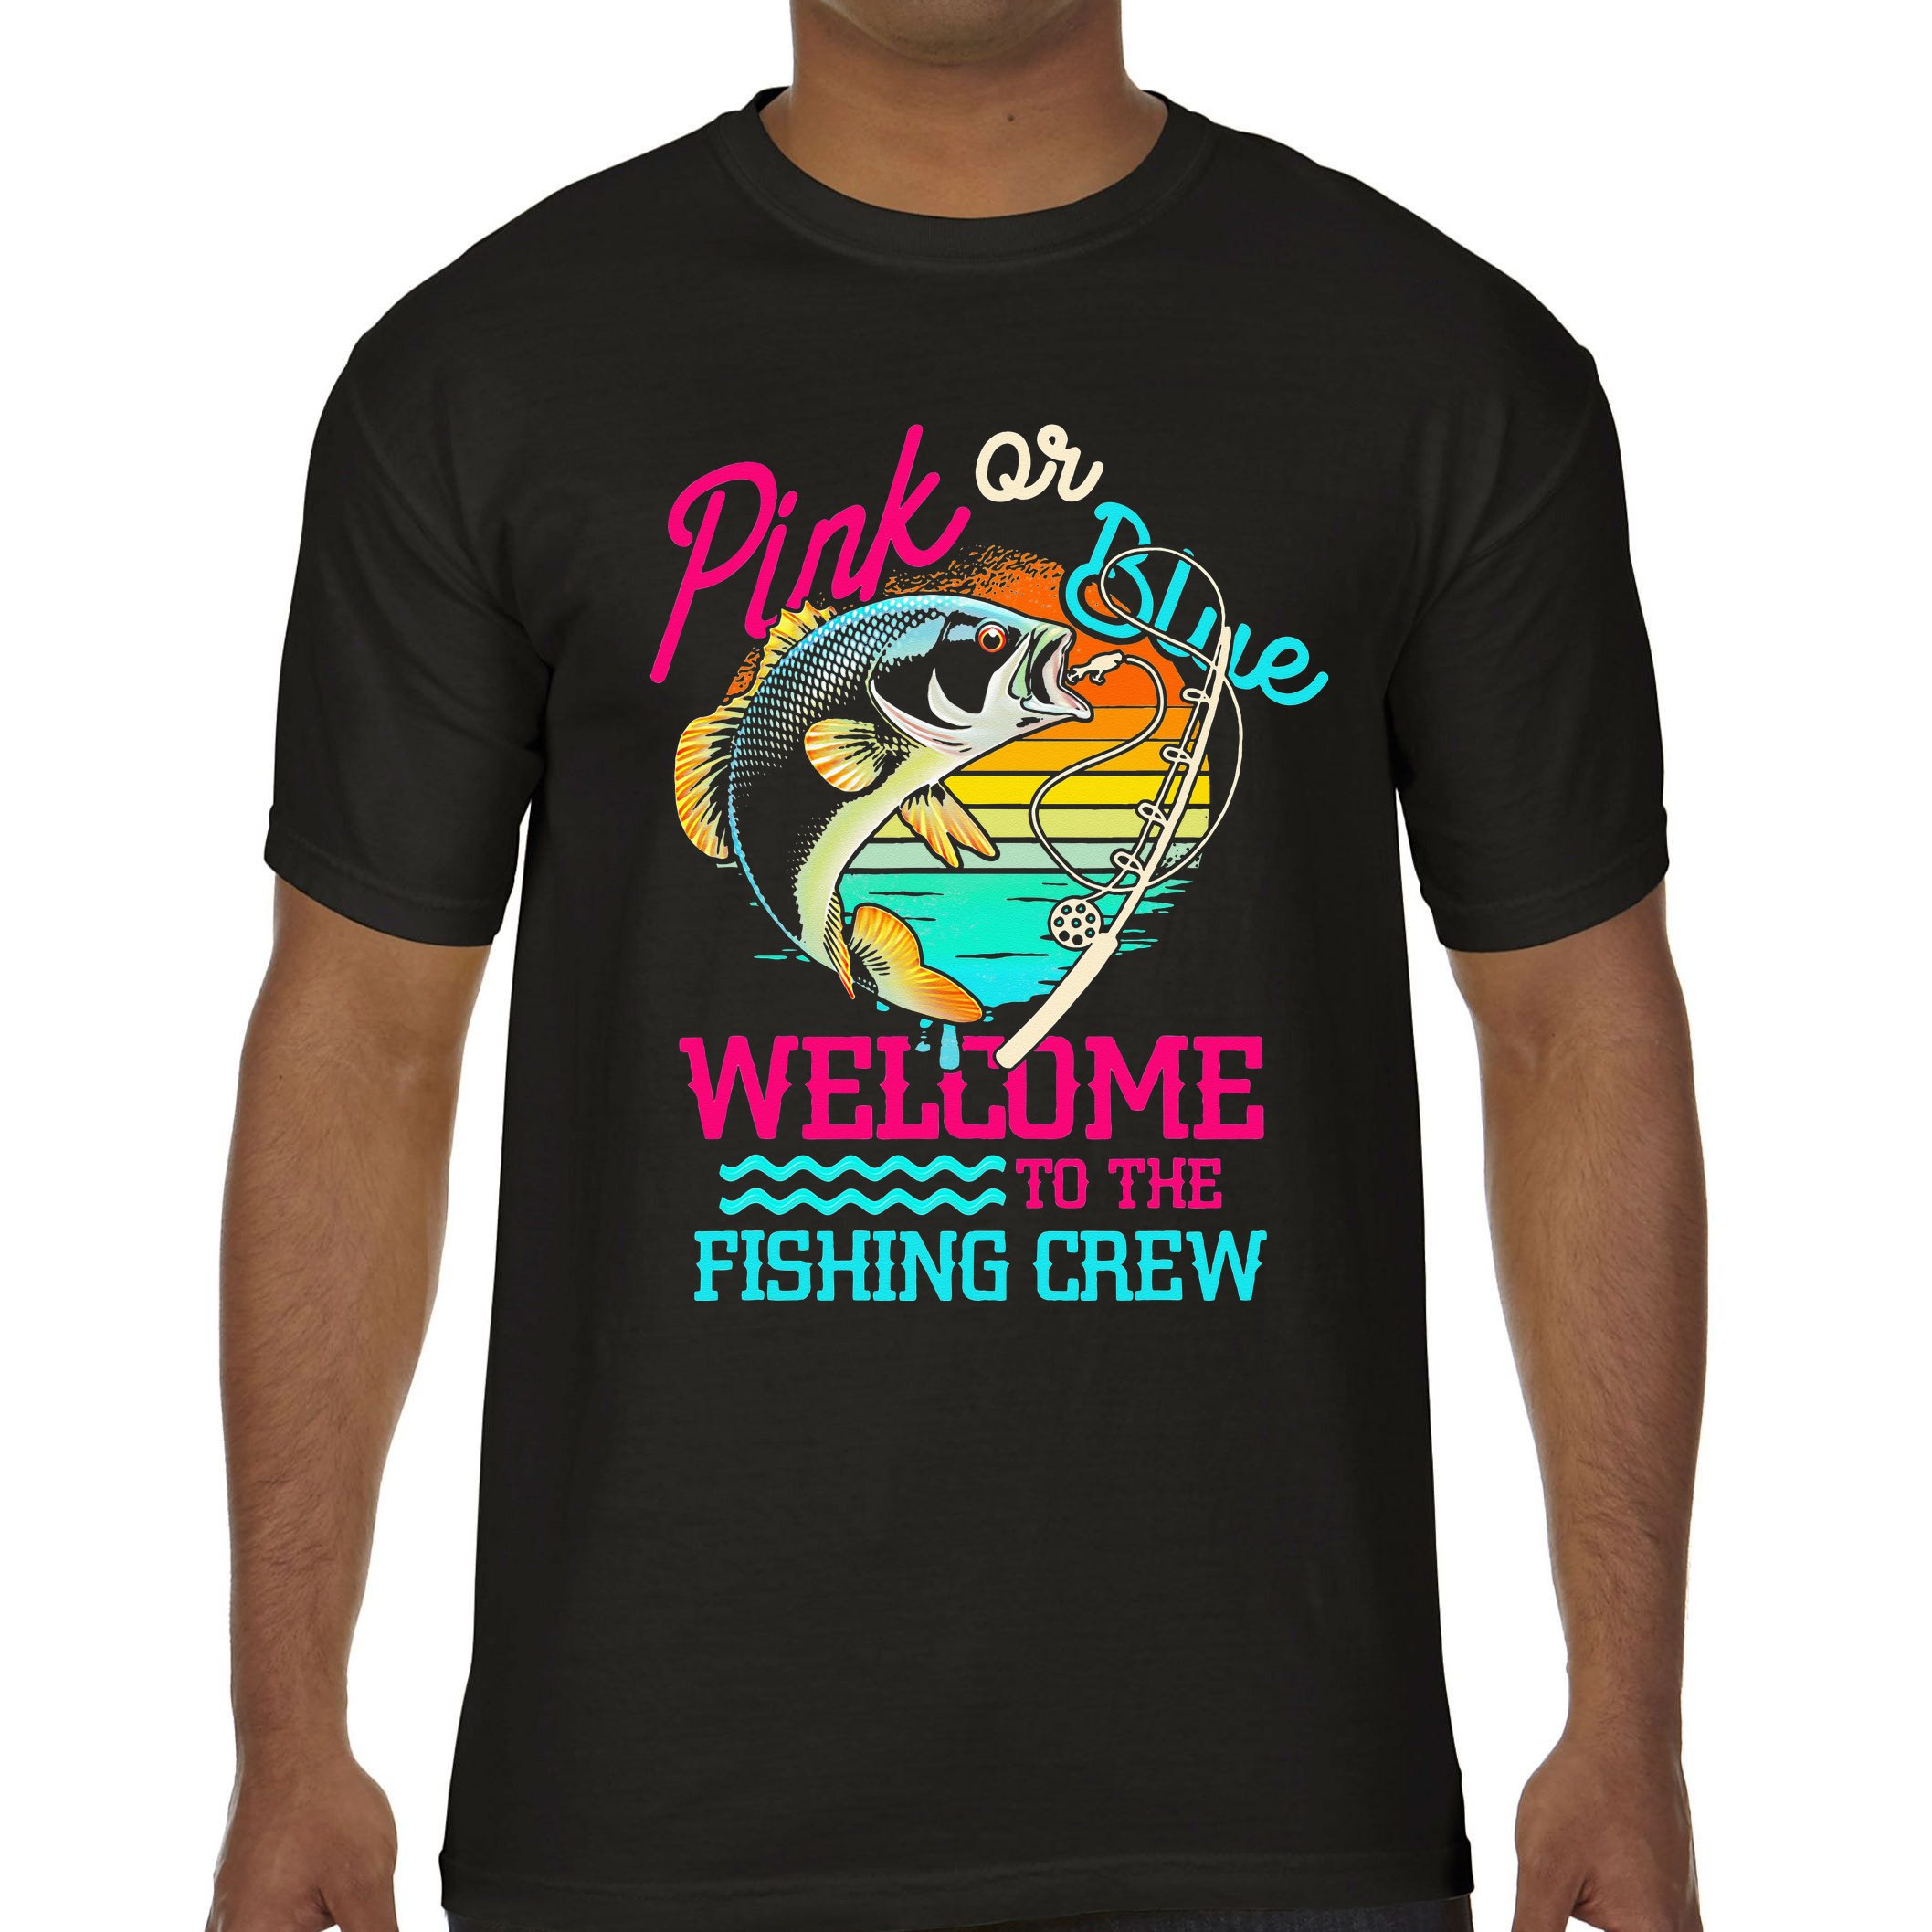 https://images3.teeshirtpalace.com/images/productImages/grf2407296-gender-reveal-fishing-pink-or-blue-welcome-to-fishing-crew--black-ccht-garment.jpg